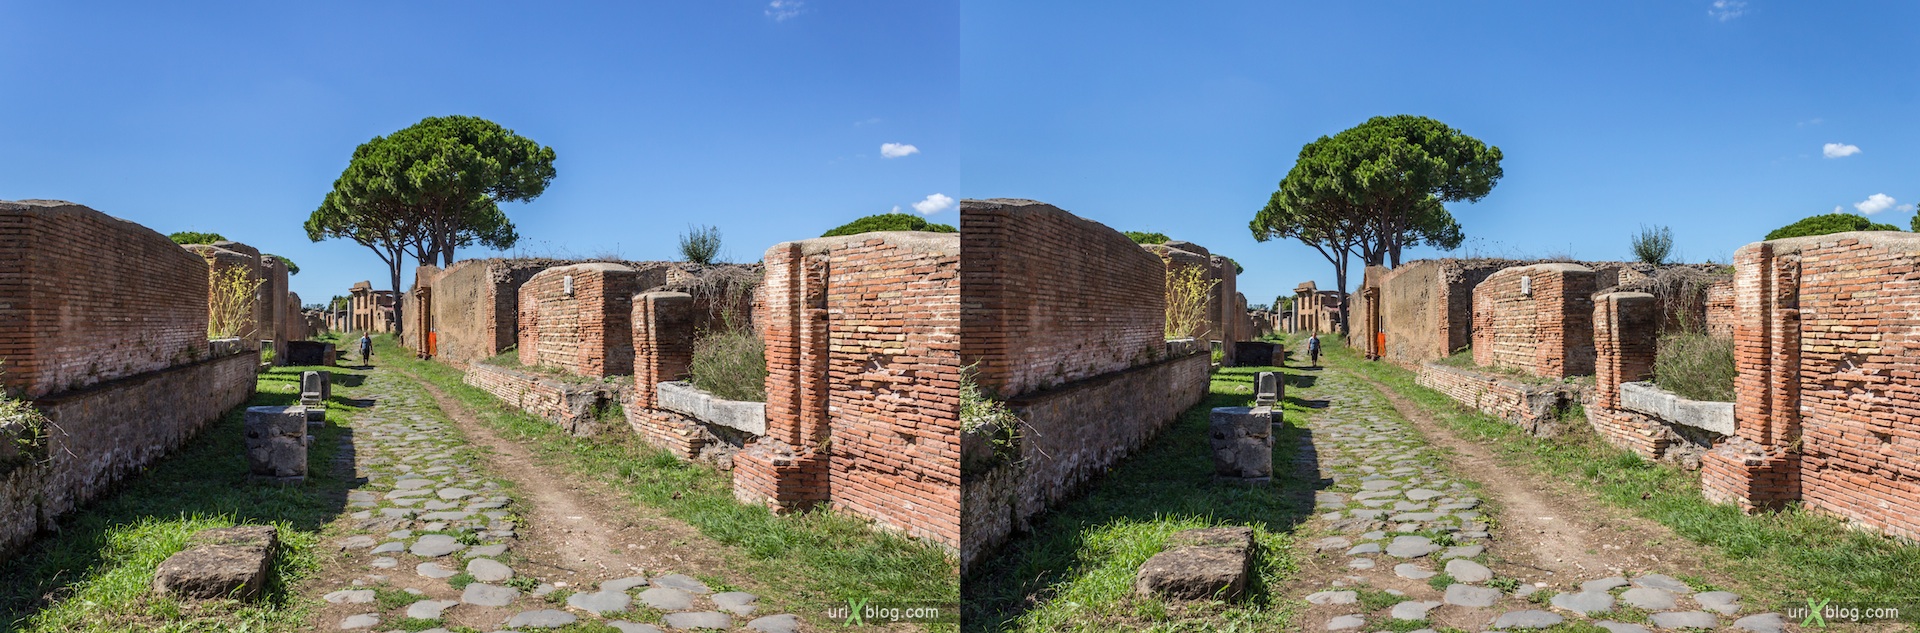 2012, Ostia Antica, Rome, Italy, ancient rome, city, 3D, stereo pair, cross-eyed, crossview, cross view stereo pair